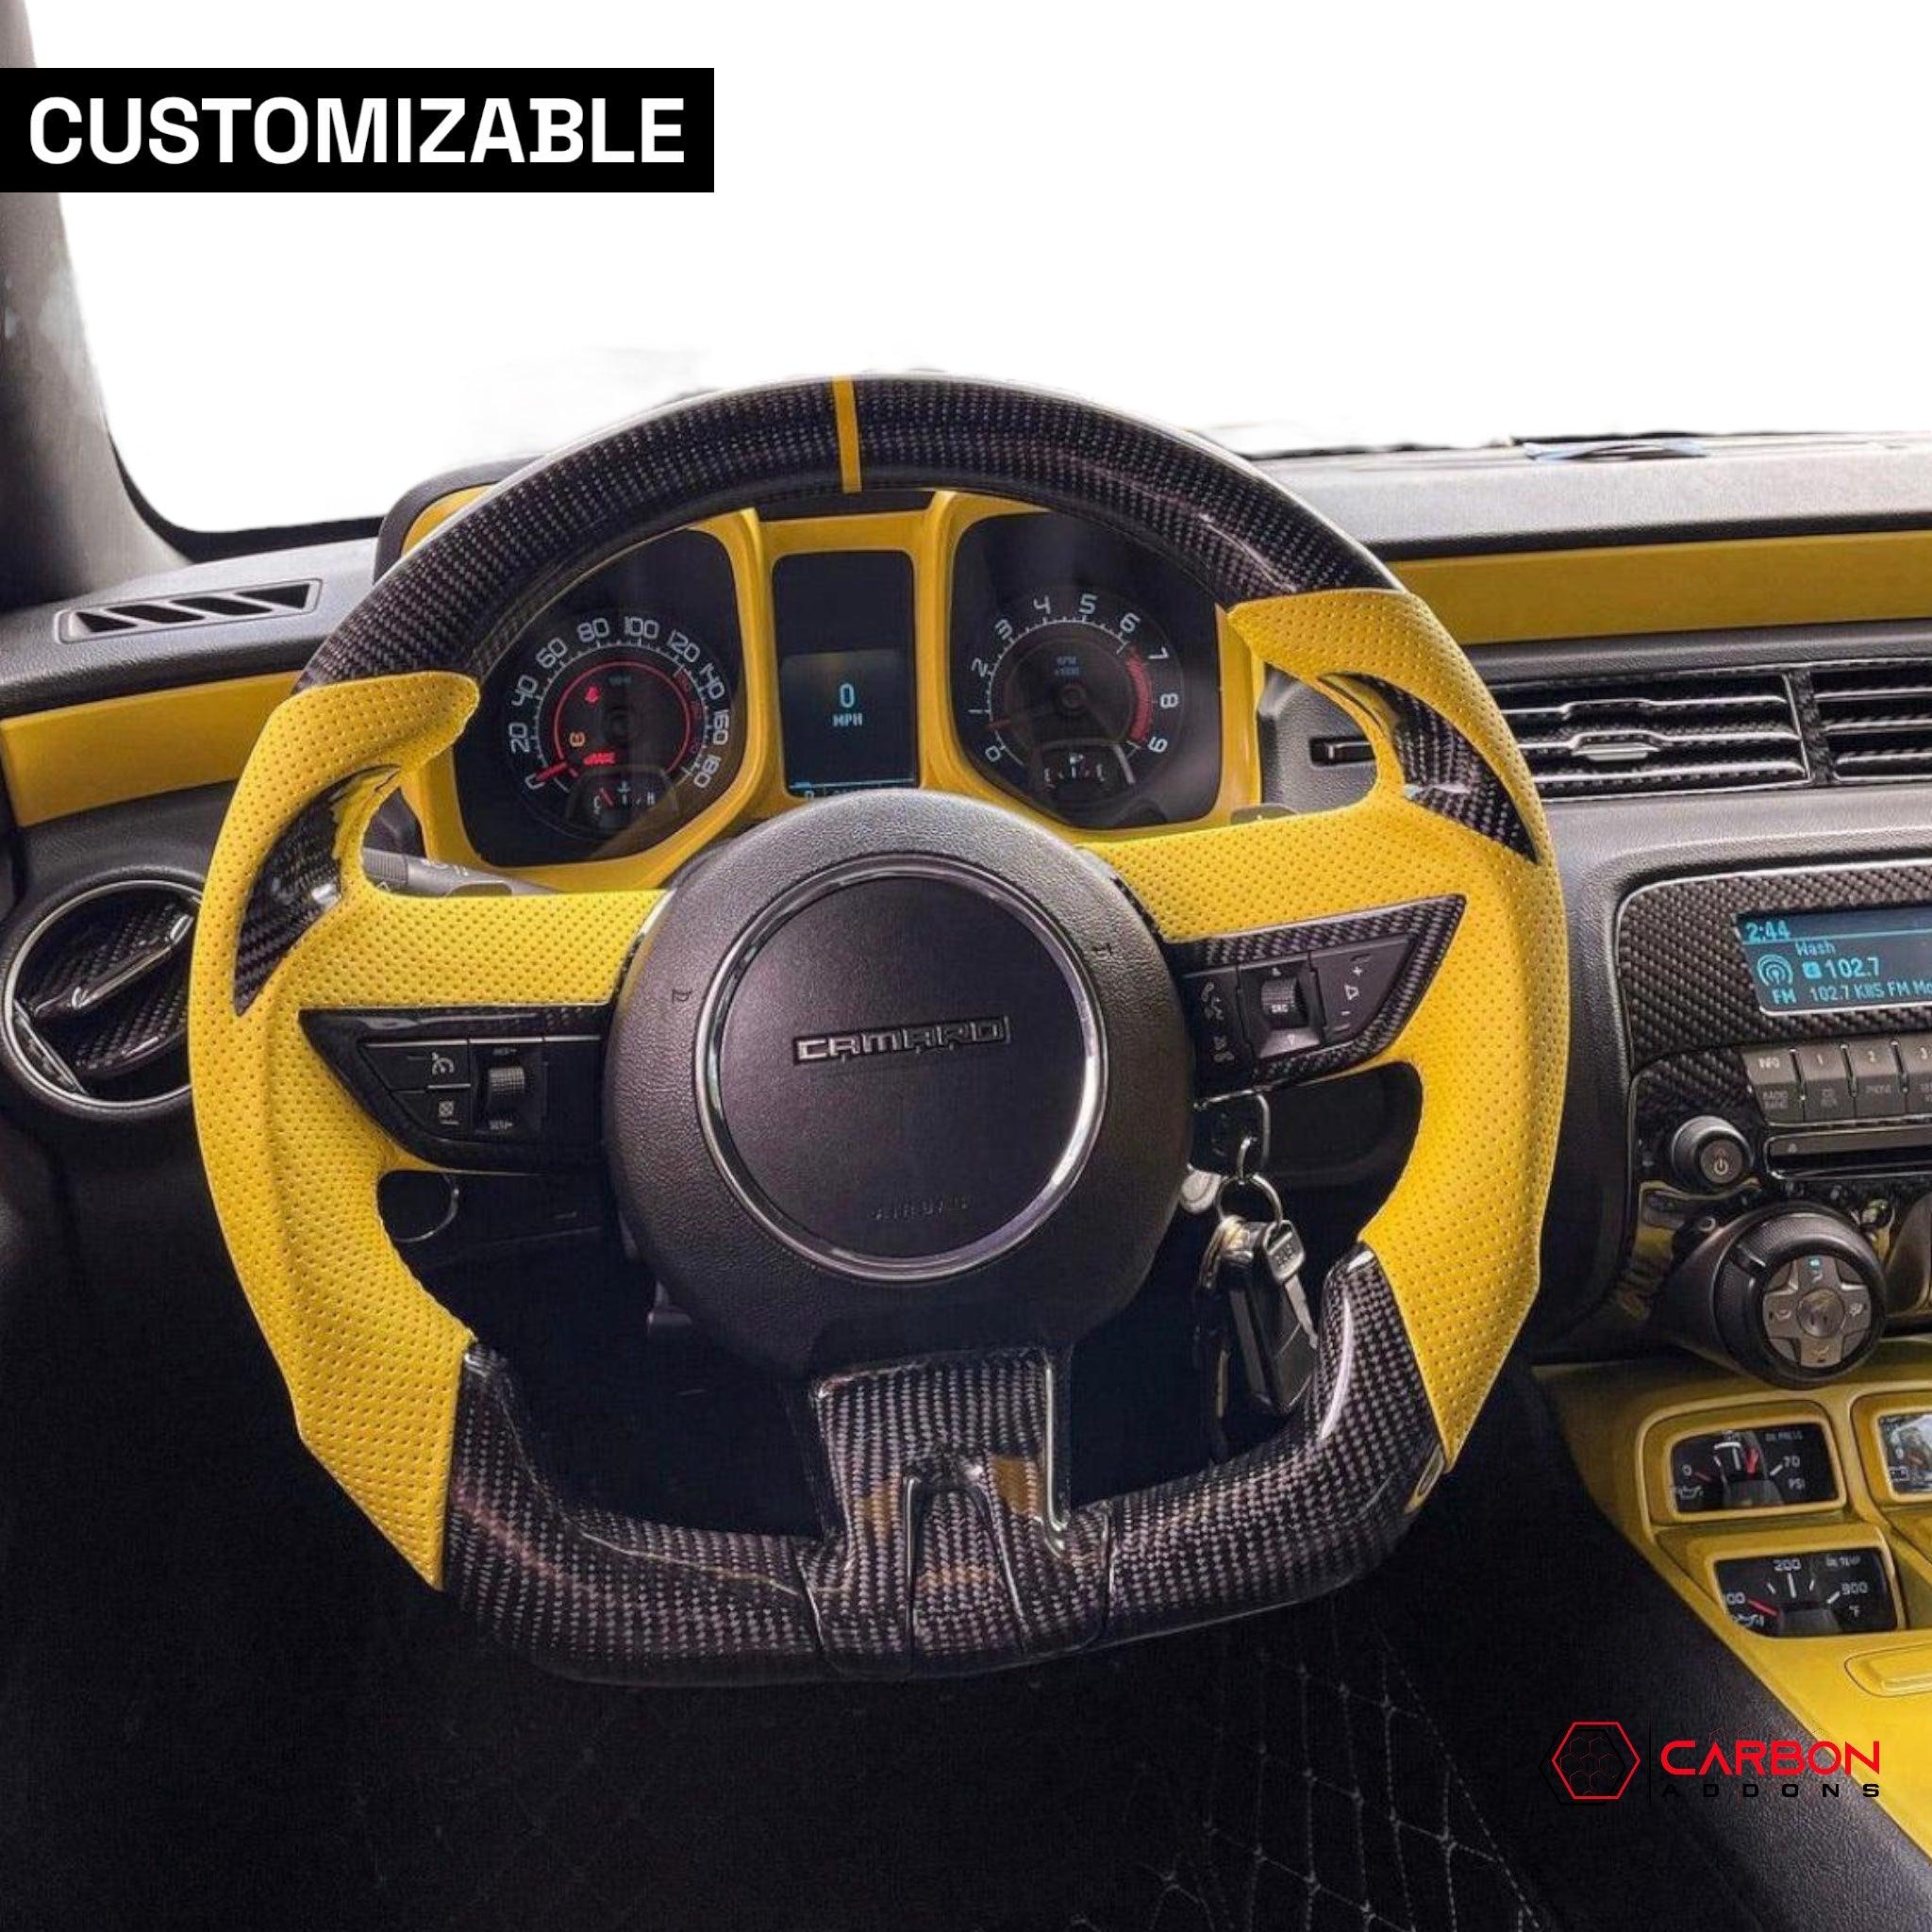 Customizable Carbon Fiber Steering Wheel for Chevy Camaro 2010-2012 - carbonaddons Carbon Fiber Parts, Accessories, Upgrades, Mods